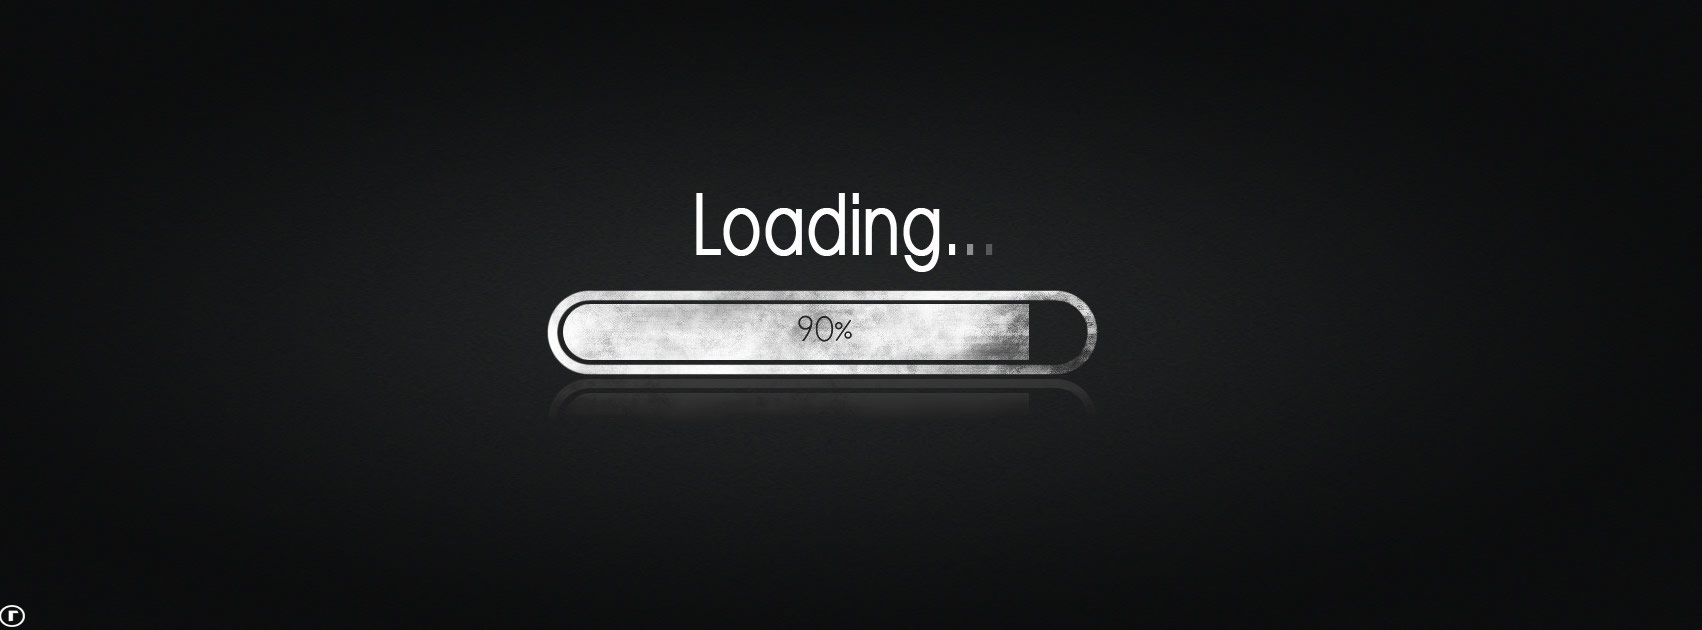 loading facebook cover image